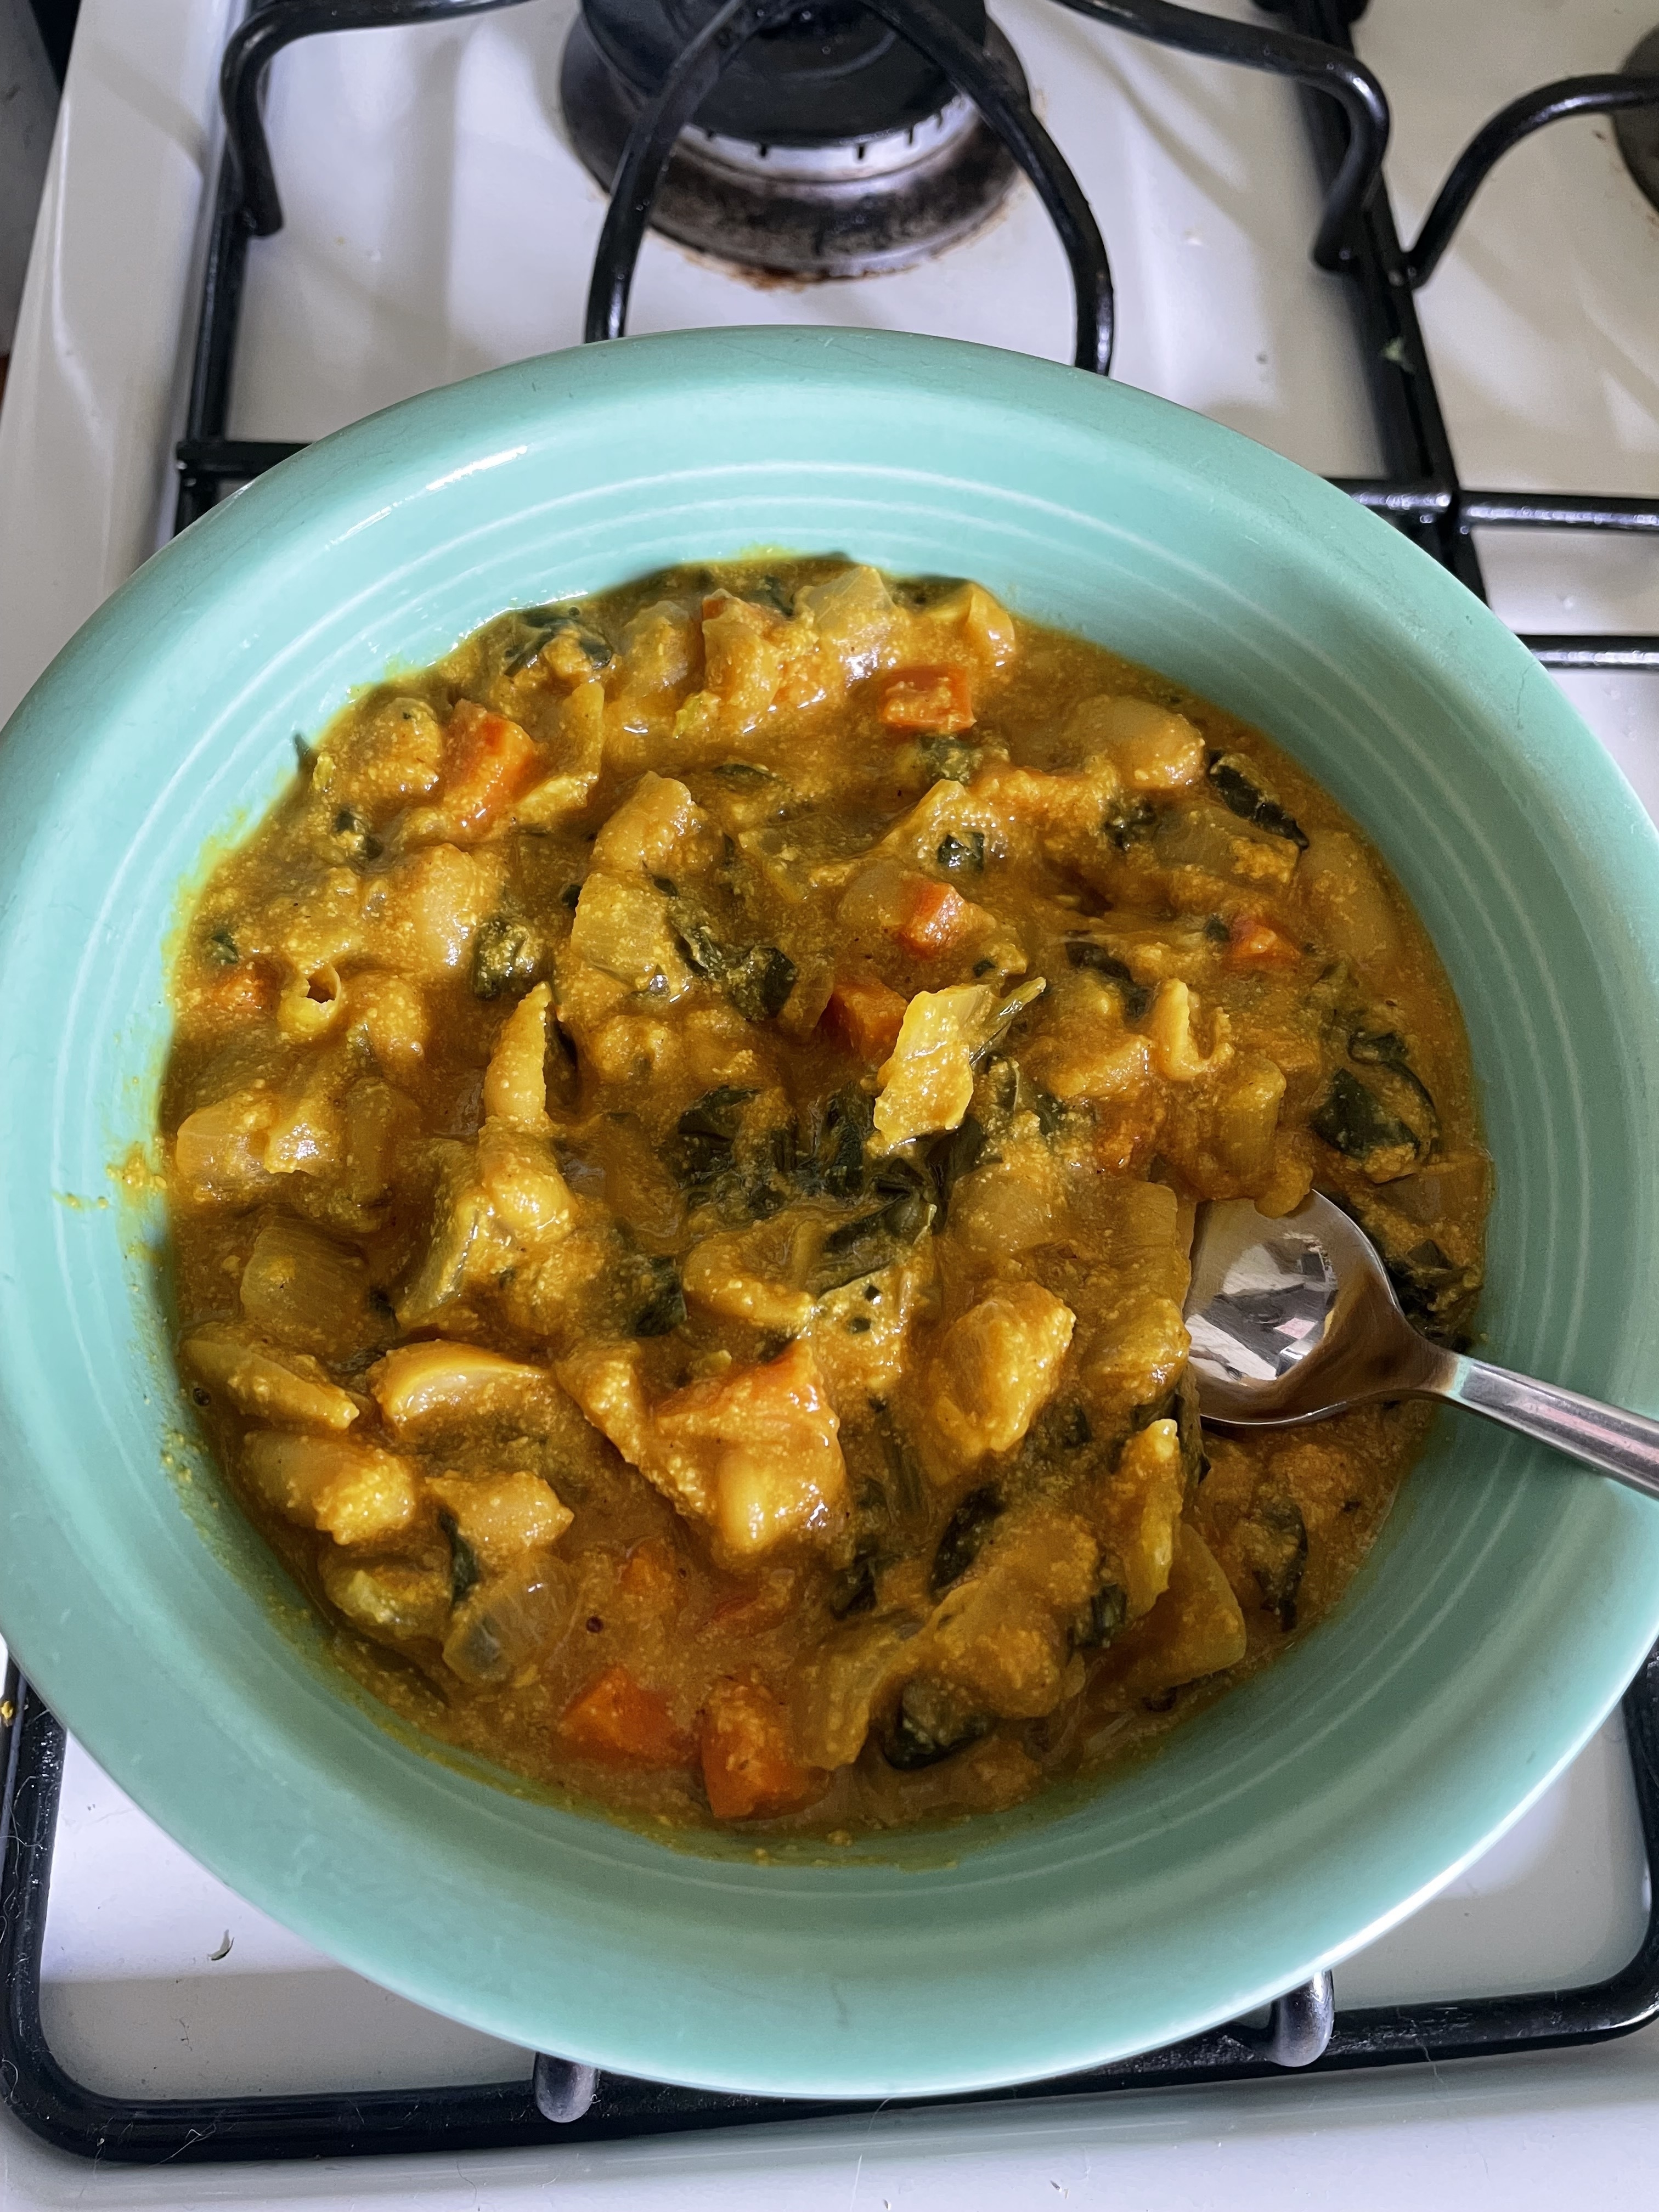 A bowl of creamy vegetable curry with a spoon rests on a stove, ready to be served